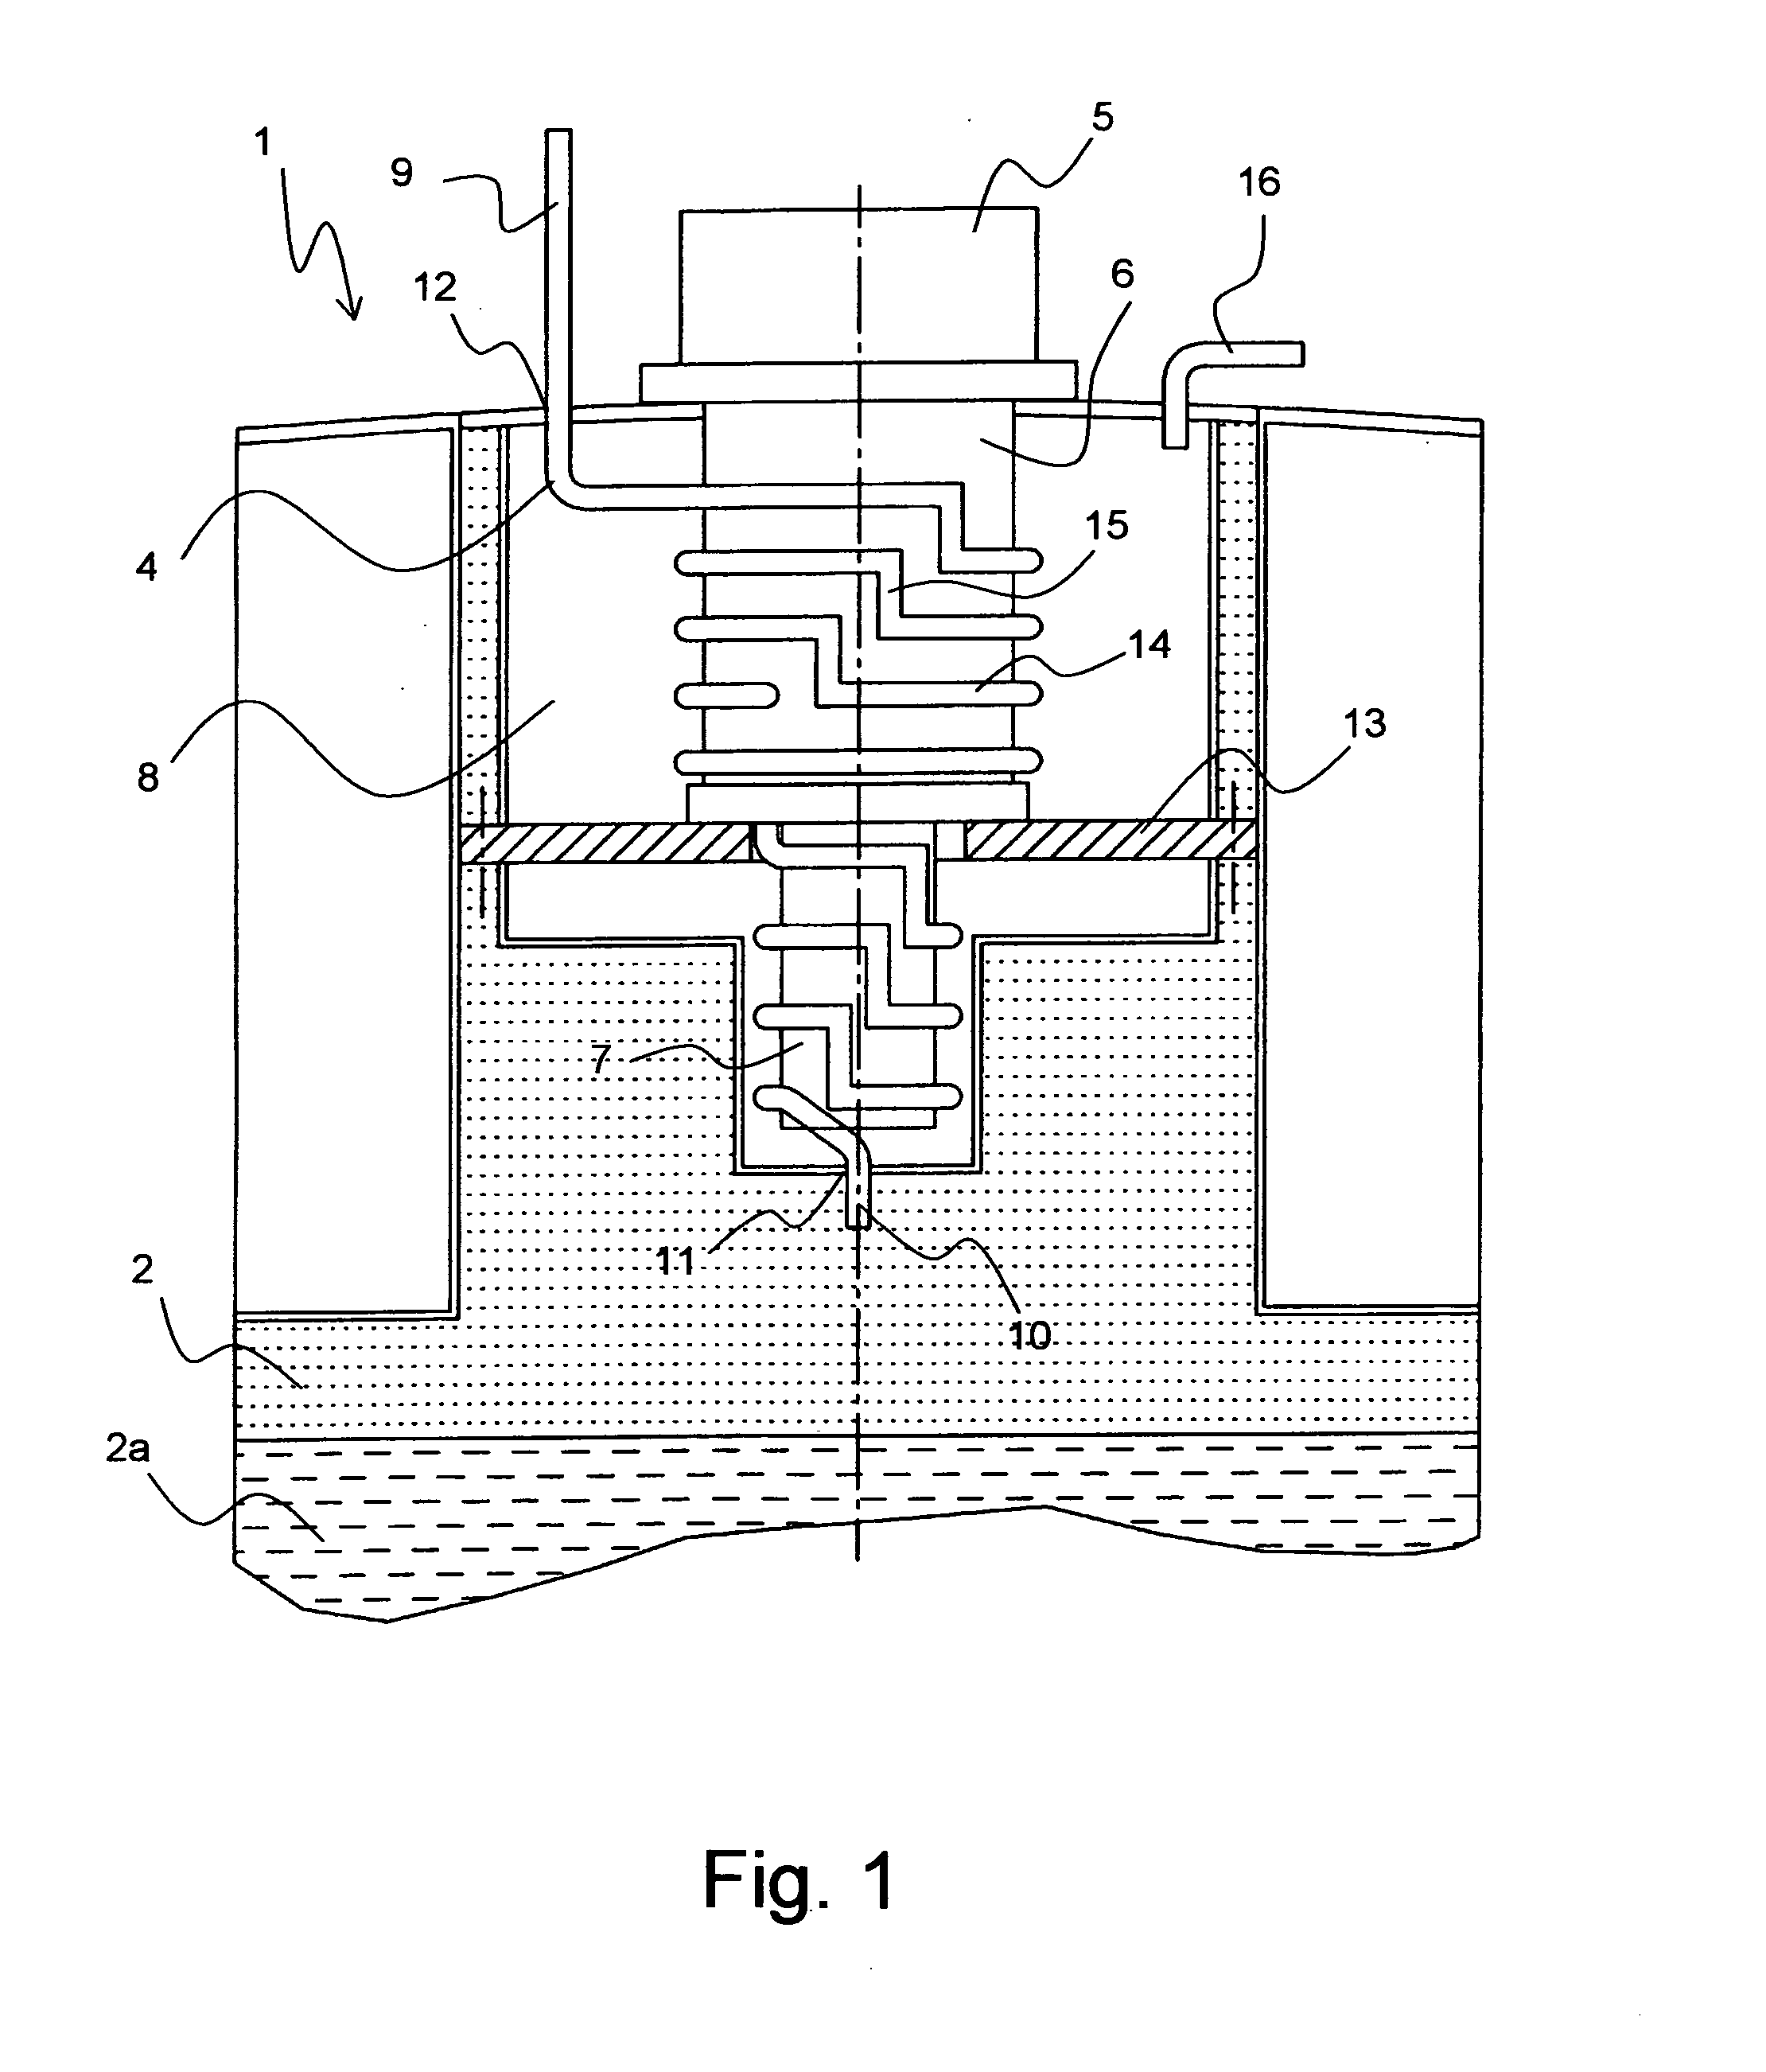 Superconducting magnet system with refrigerator for re-liquifying cryogenic fluid in a tubular conduit